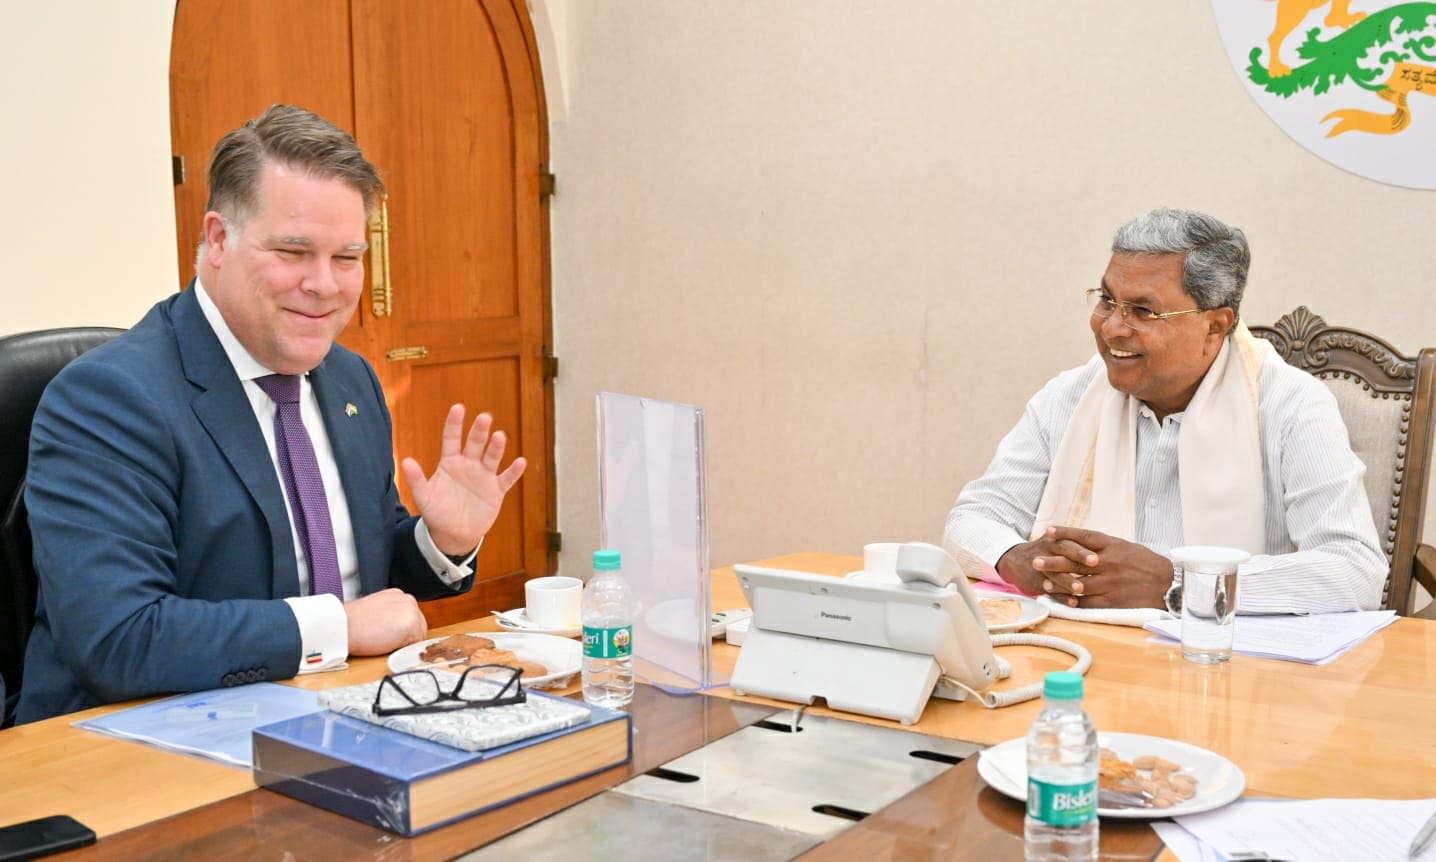 netherlands consul general for south india karnataka chief minister discuss dutch investments in state 1 – The News Mill